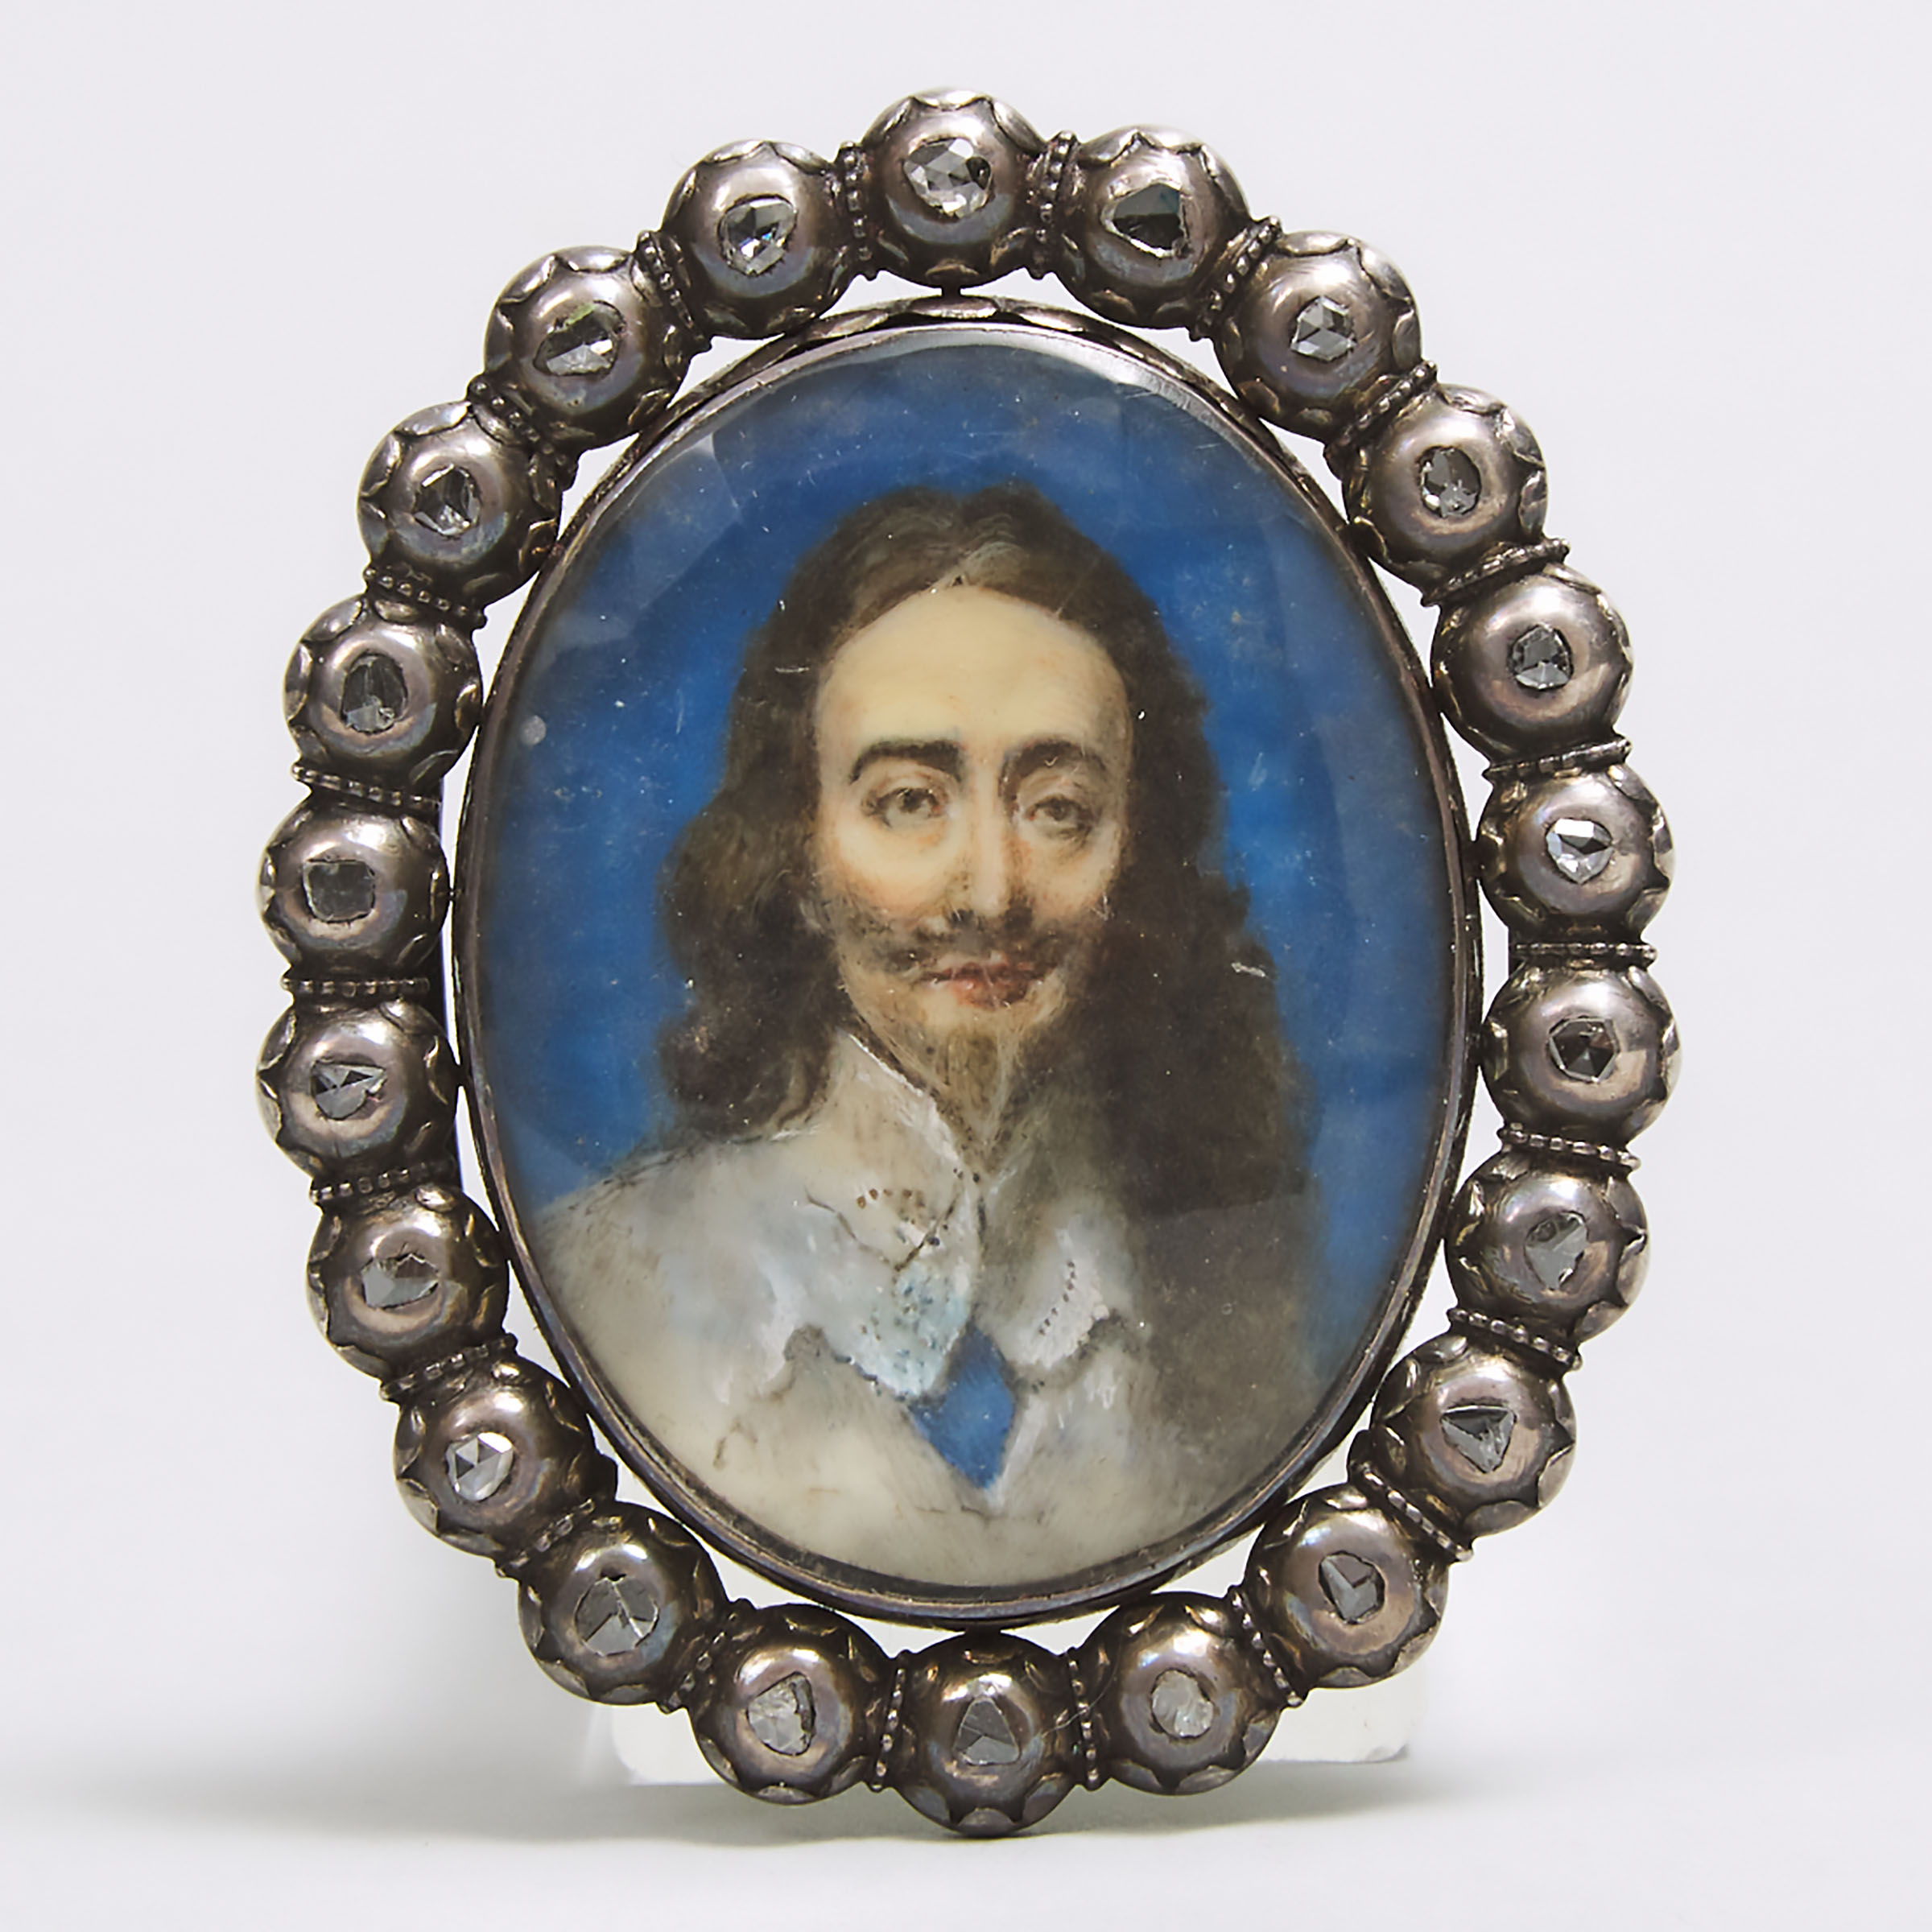 'Stuart Crystal' Charles I of England Diamond Mounted Silver and Gold Mourning Slide, mid 17th century